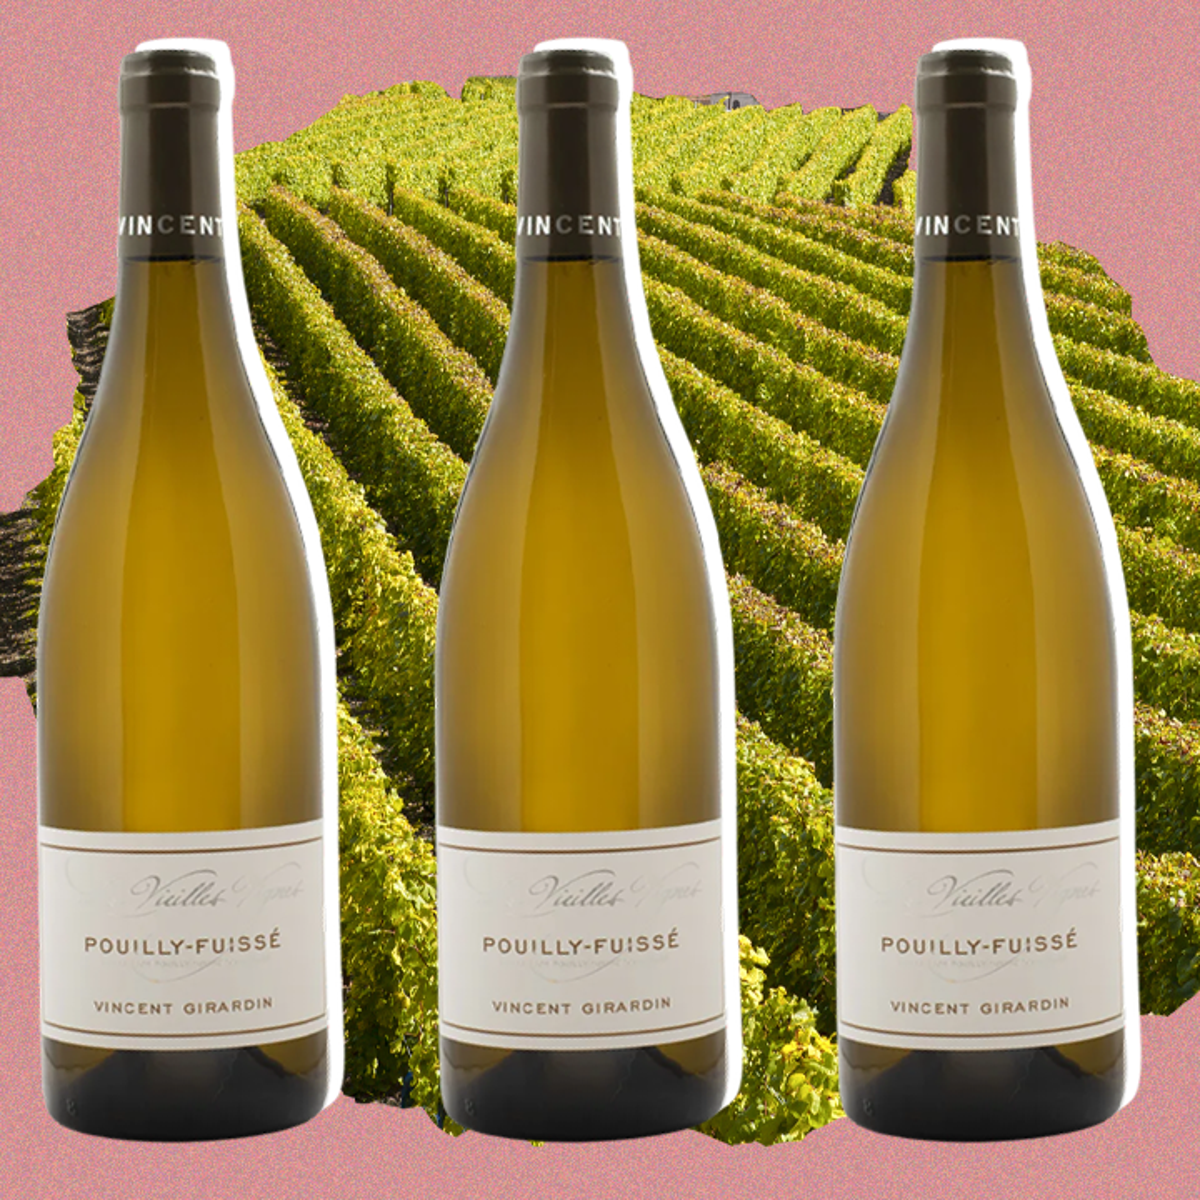 This luxury wine is sure to change your mind about chardonnay – and it’s reduced